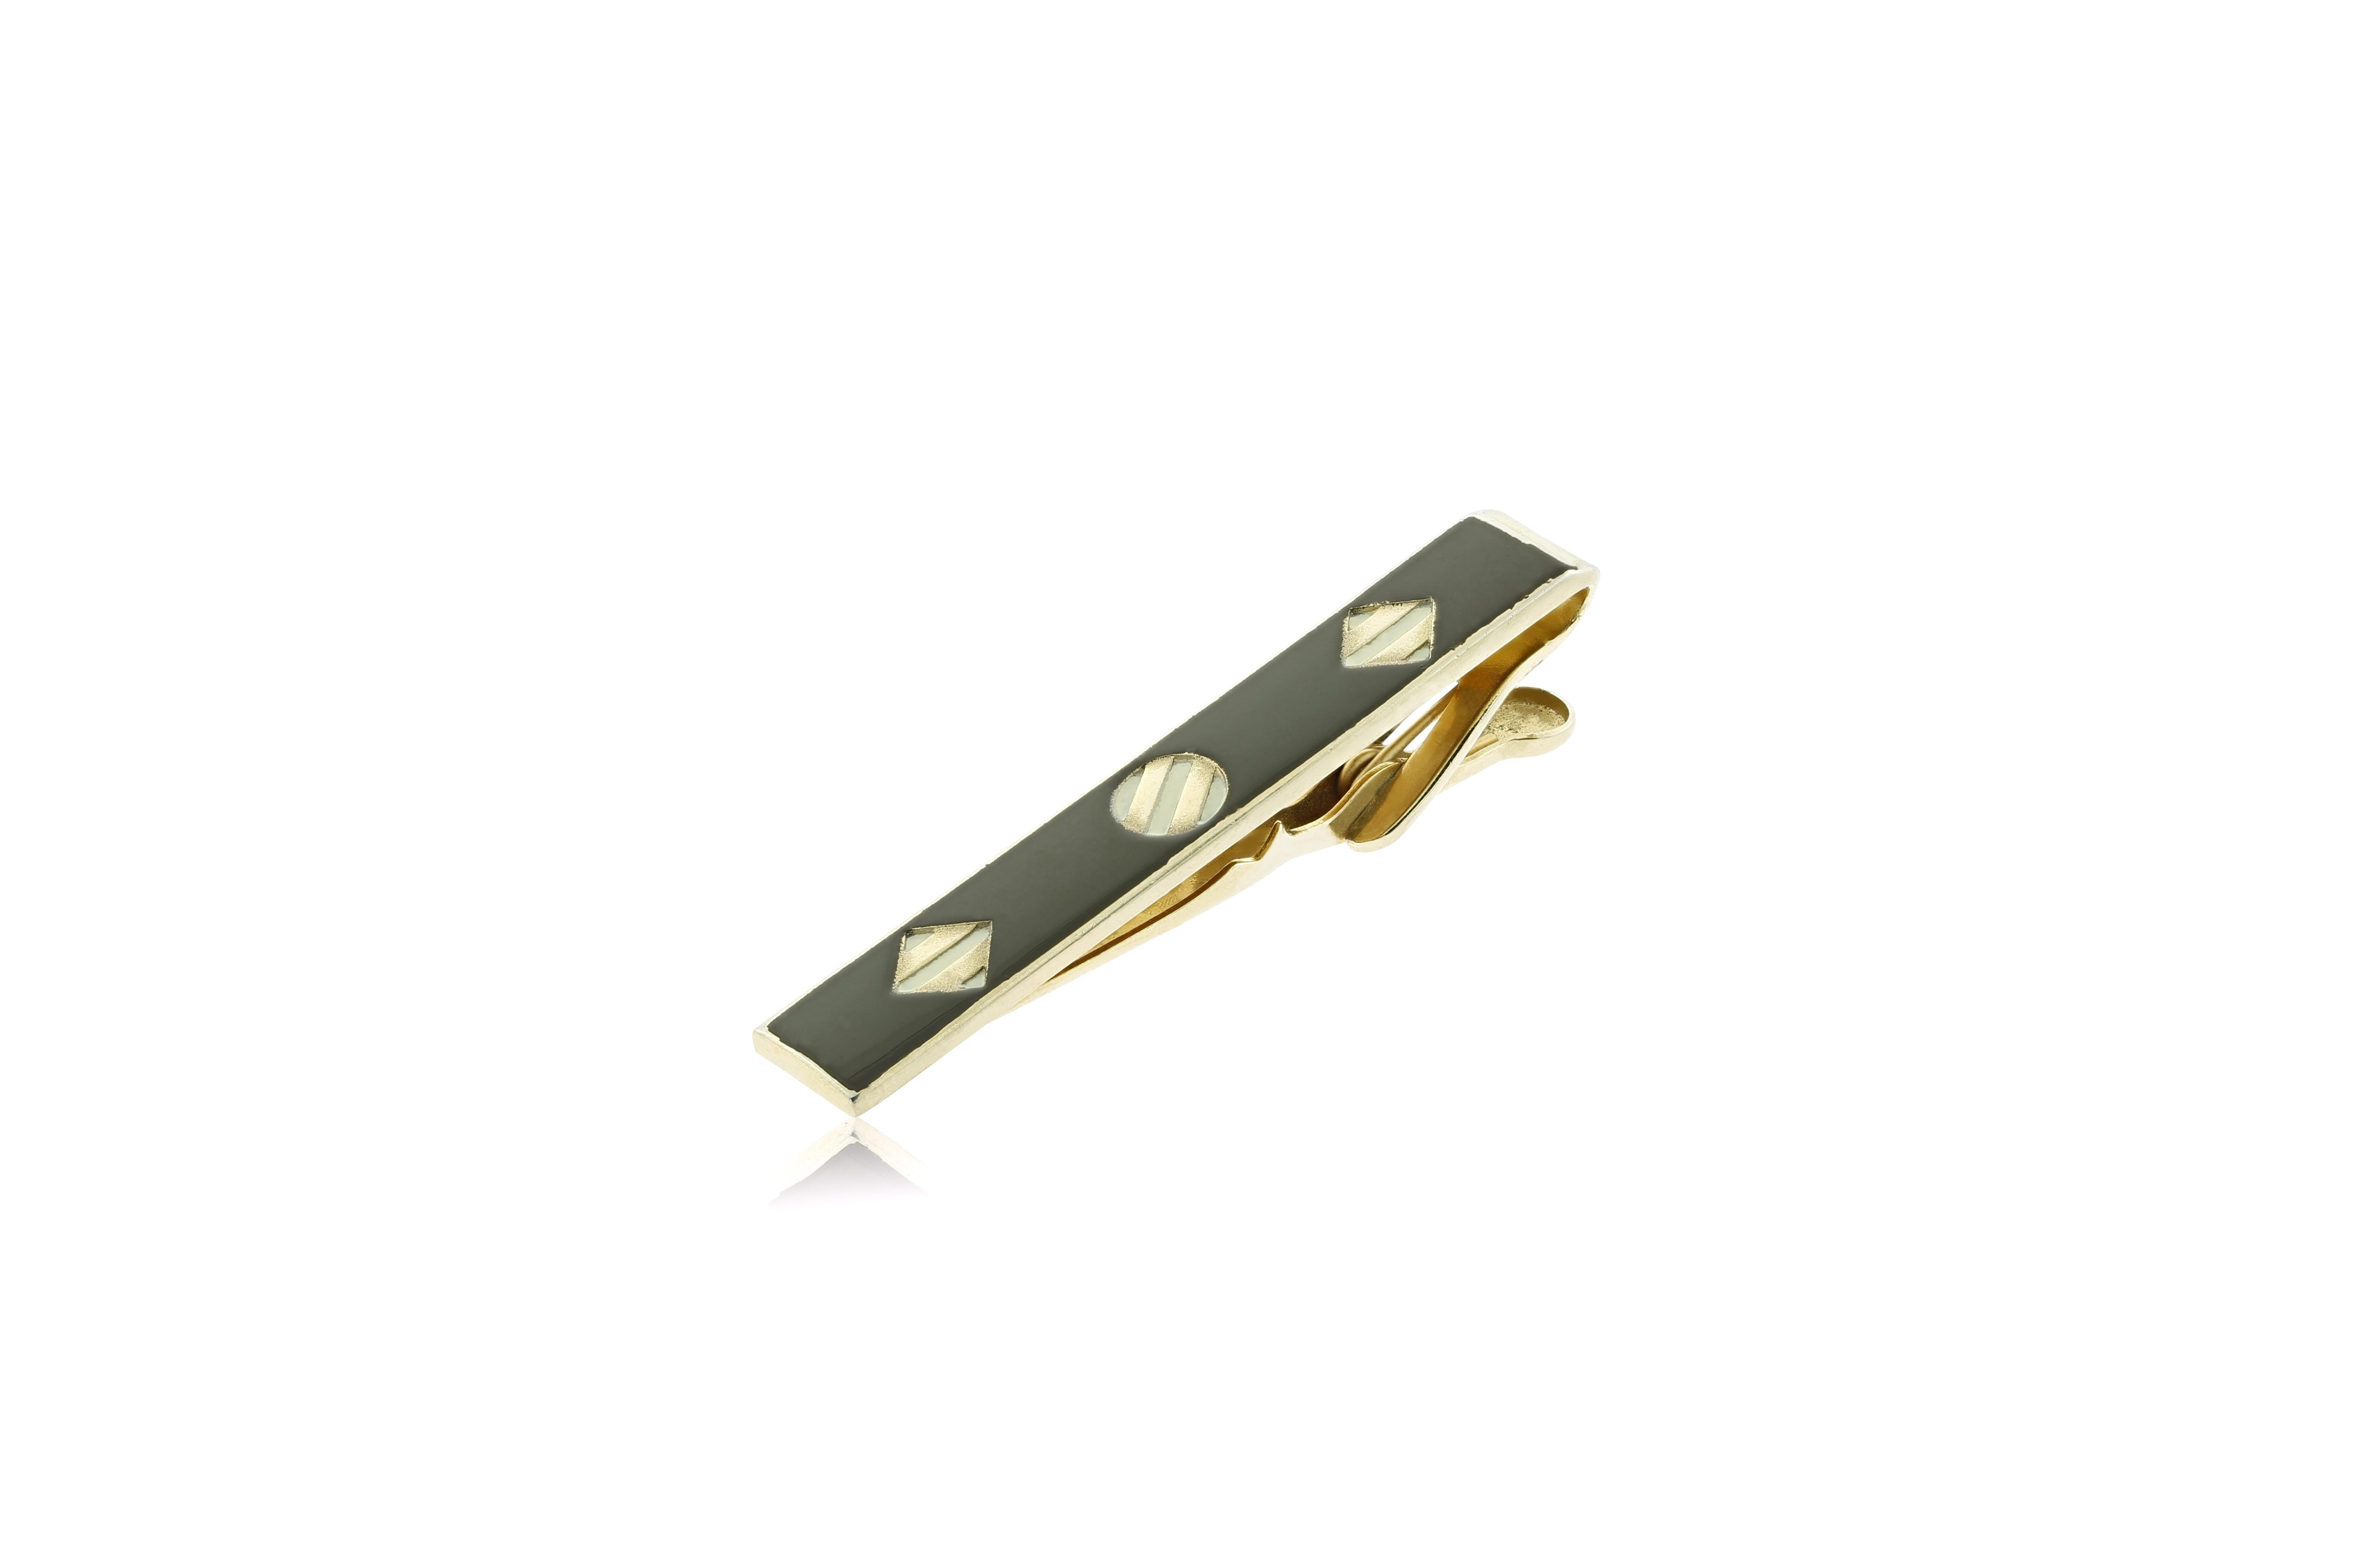 Swank 1960s Art Deco Gold Plated Tie Clip For Sale 1